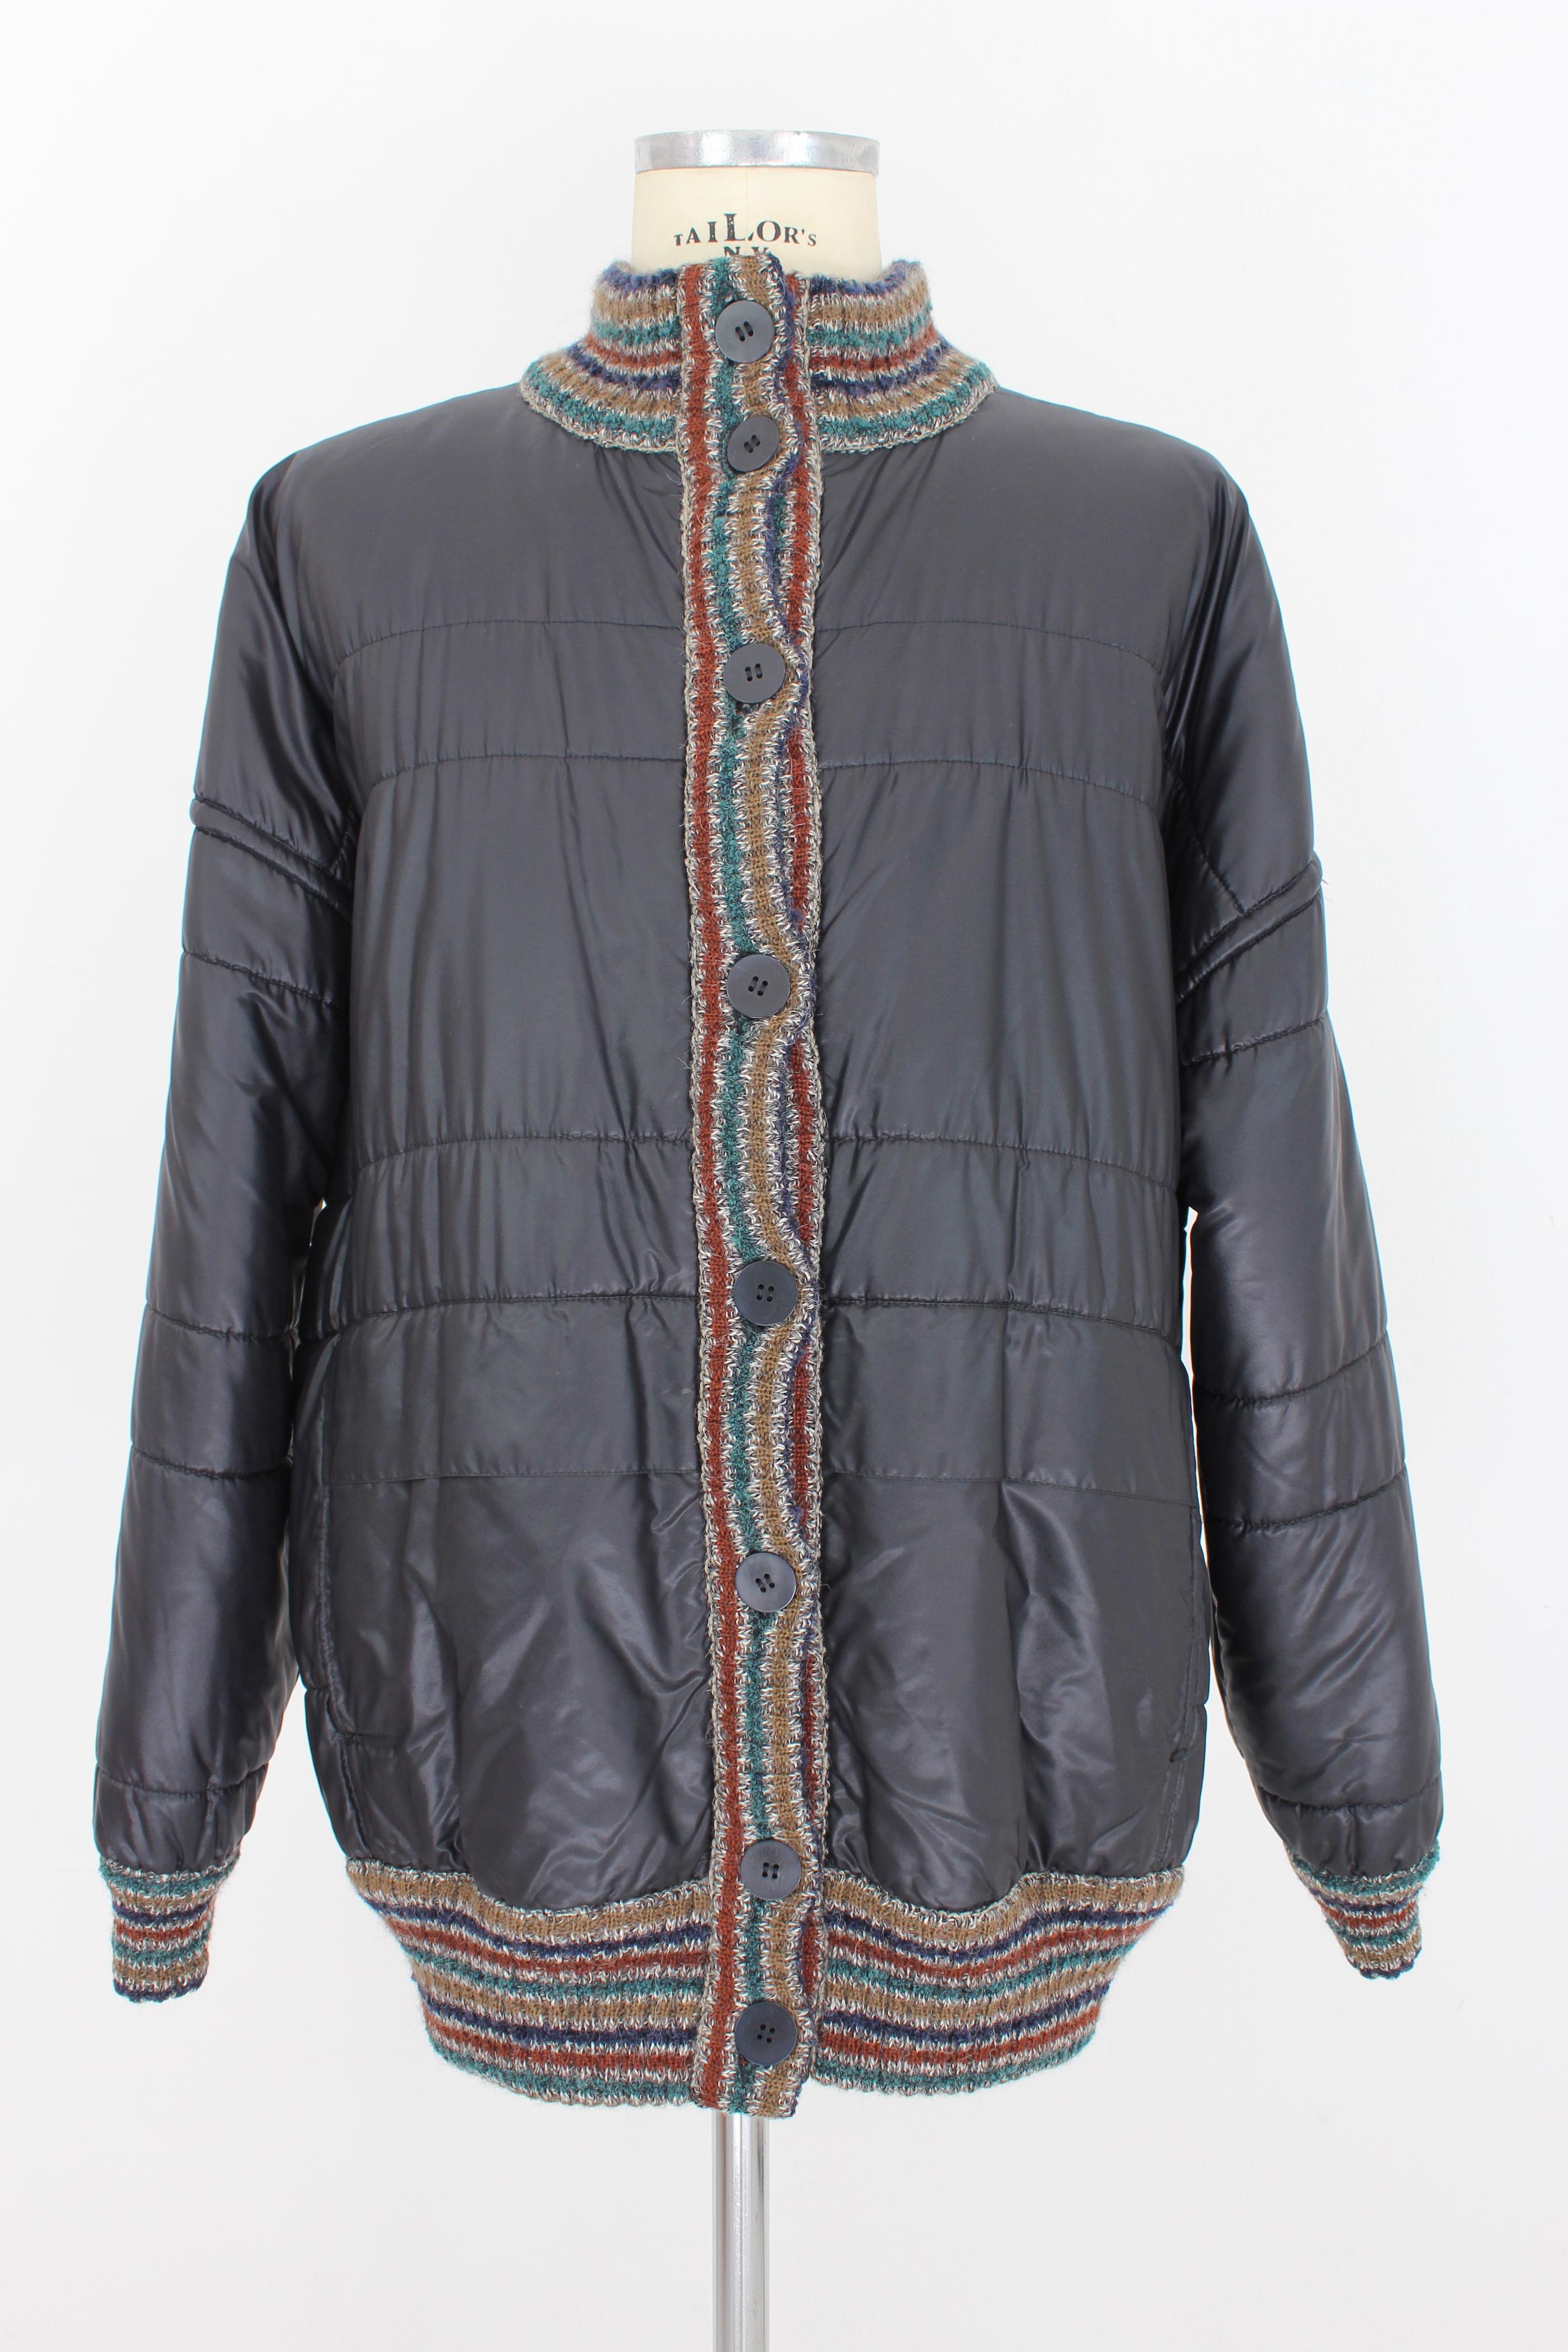 Missoni vintage 80s men's jacket. Double face jacket, alpaca and mohair wool on one side, padded down on the other side. Green and blue color with paisley pattern. Button closure, side pockets. Made in Italy

Condition: Very good

Item in excellent